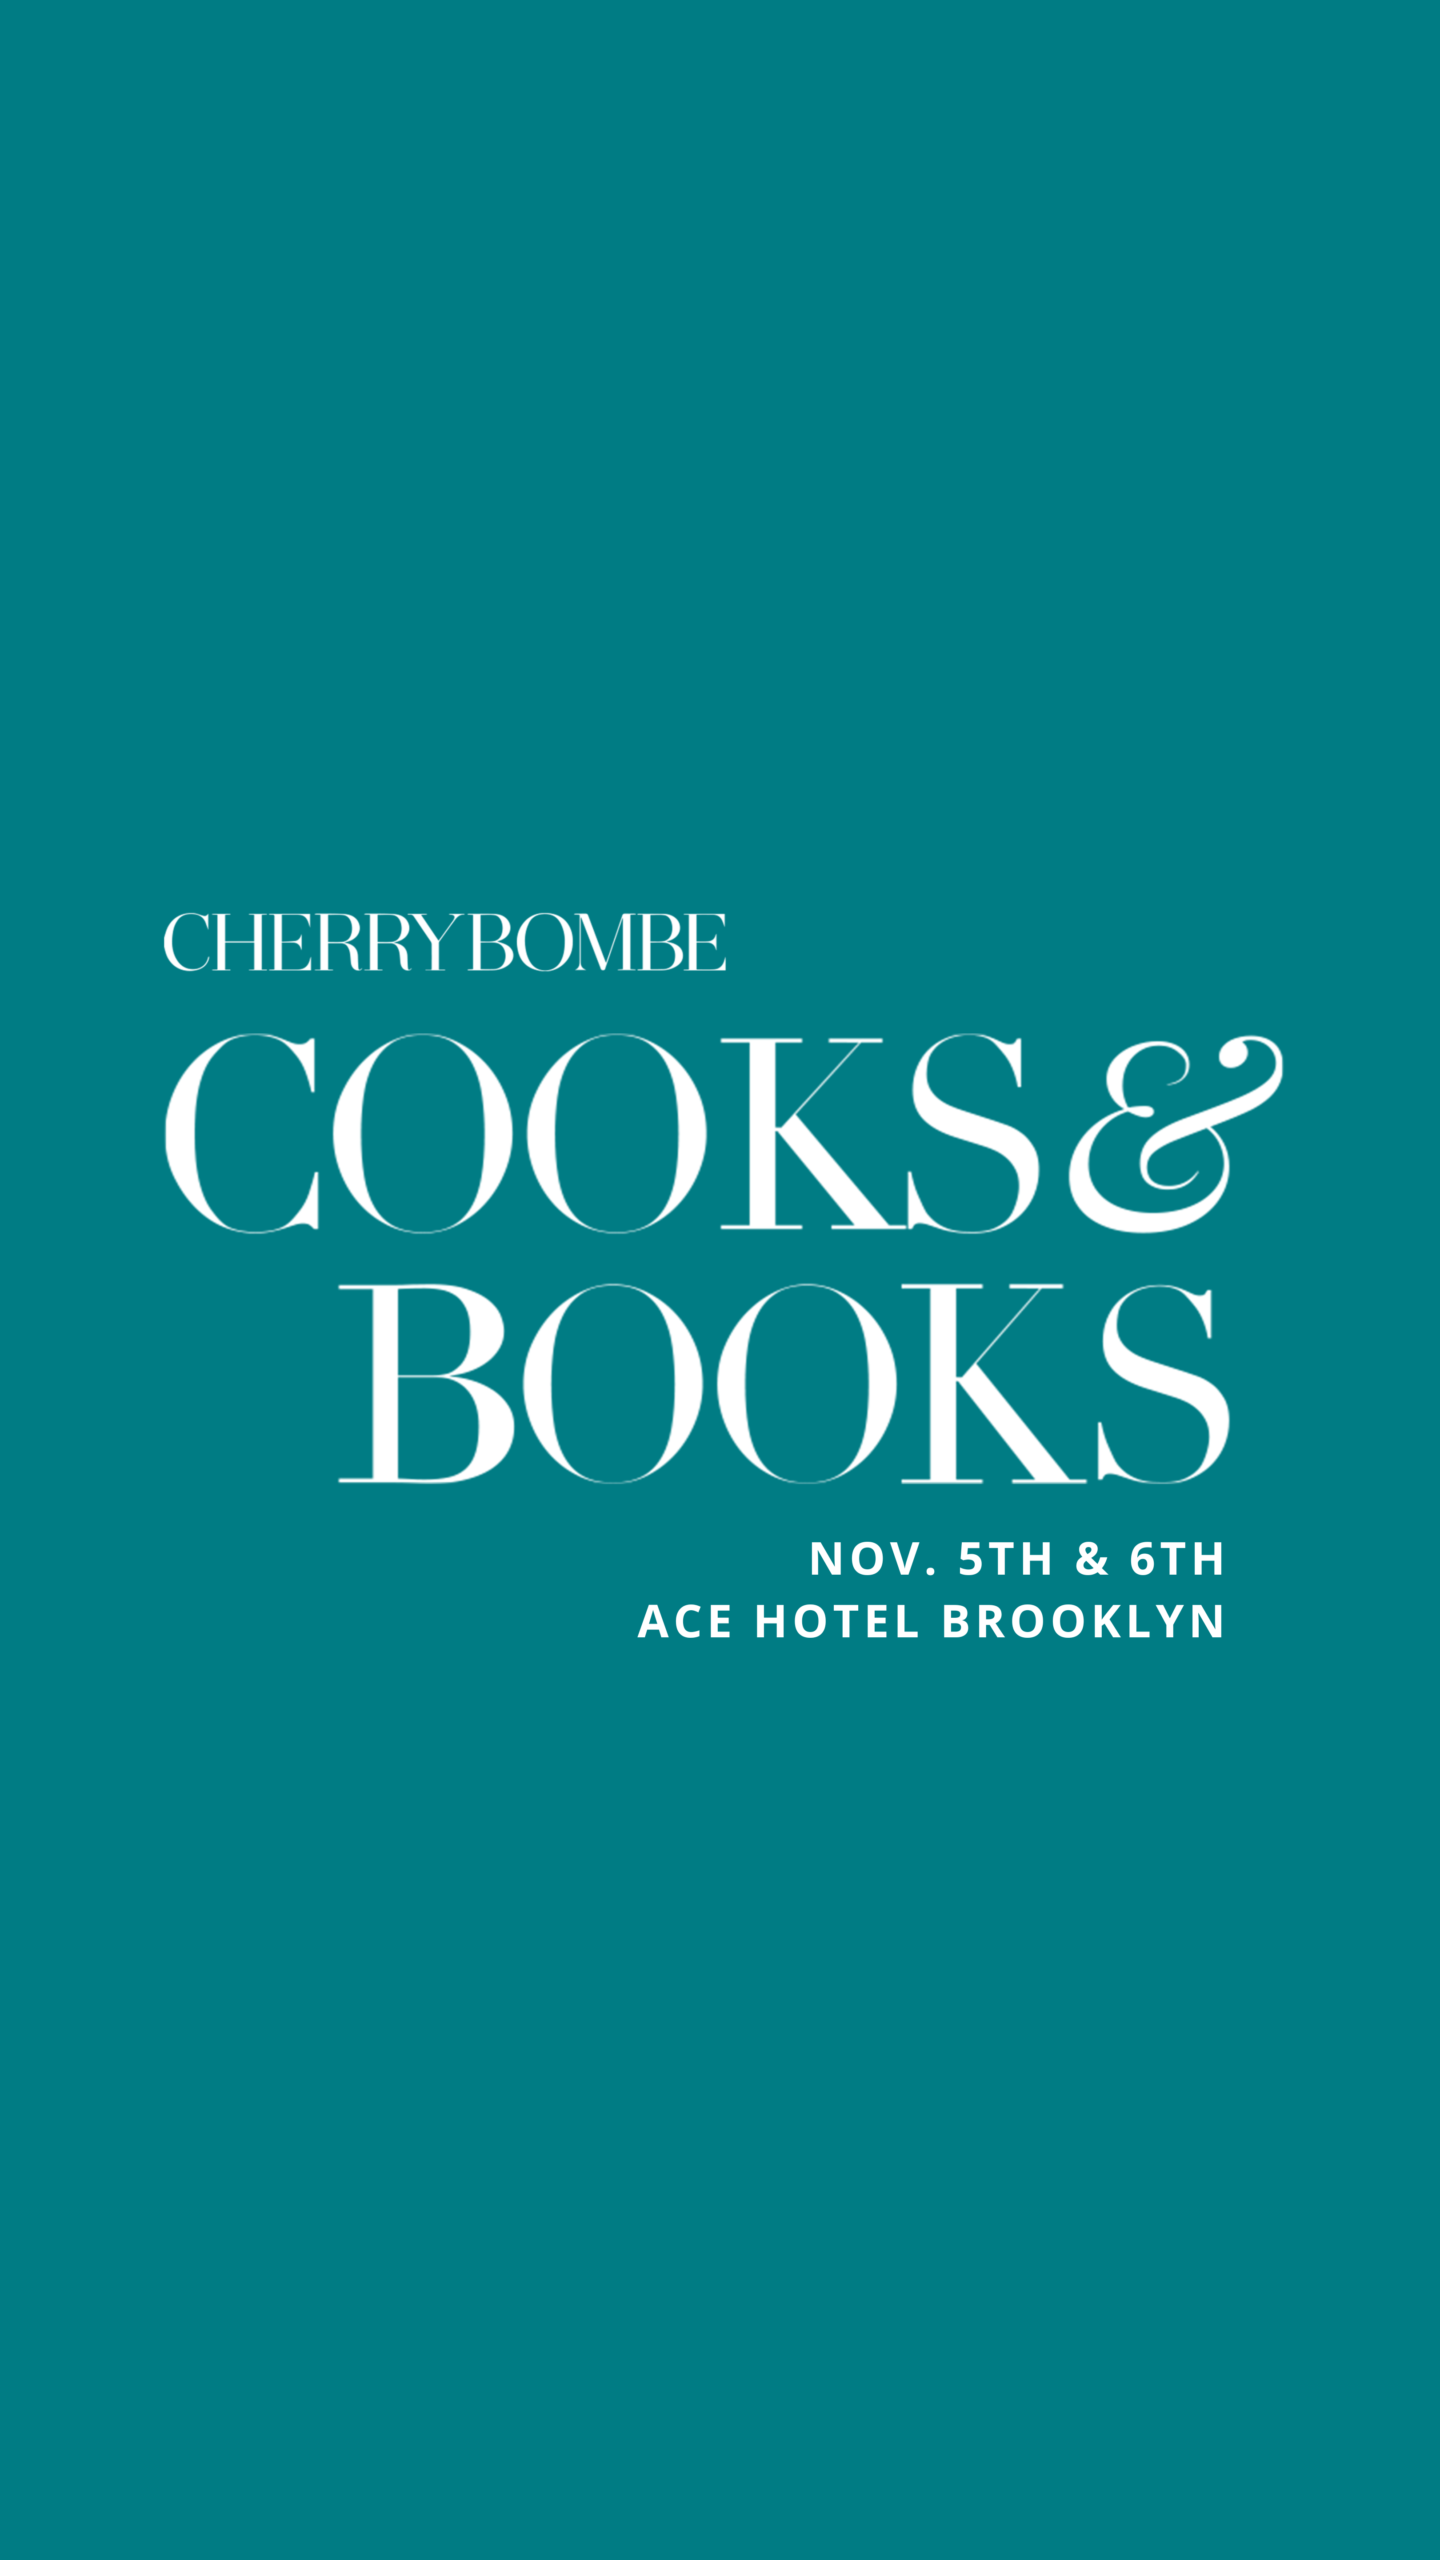 cherry bombe cooks and books poster